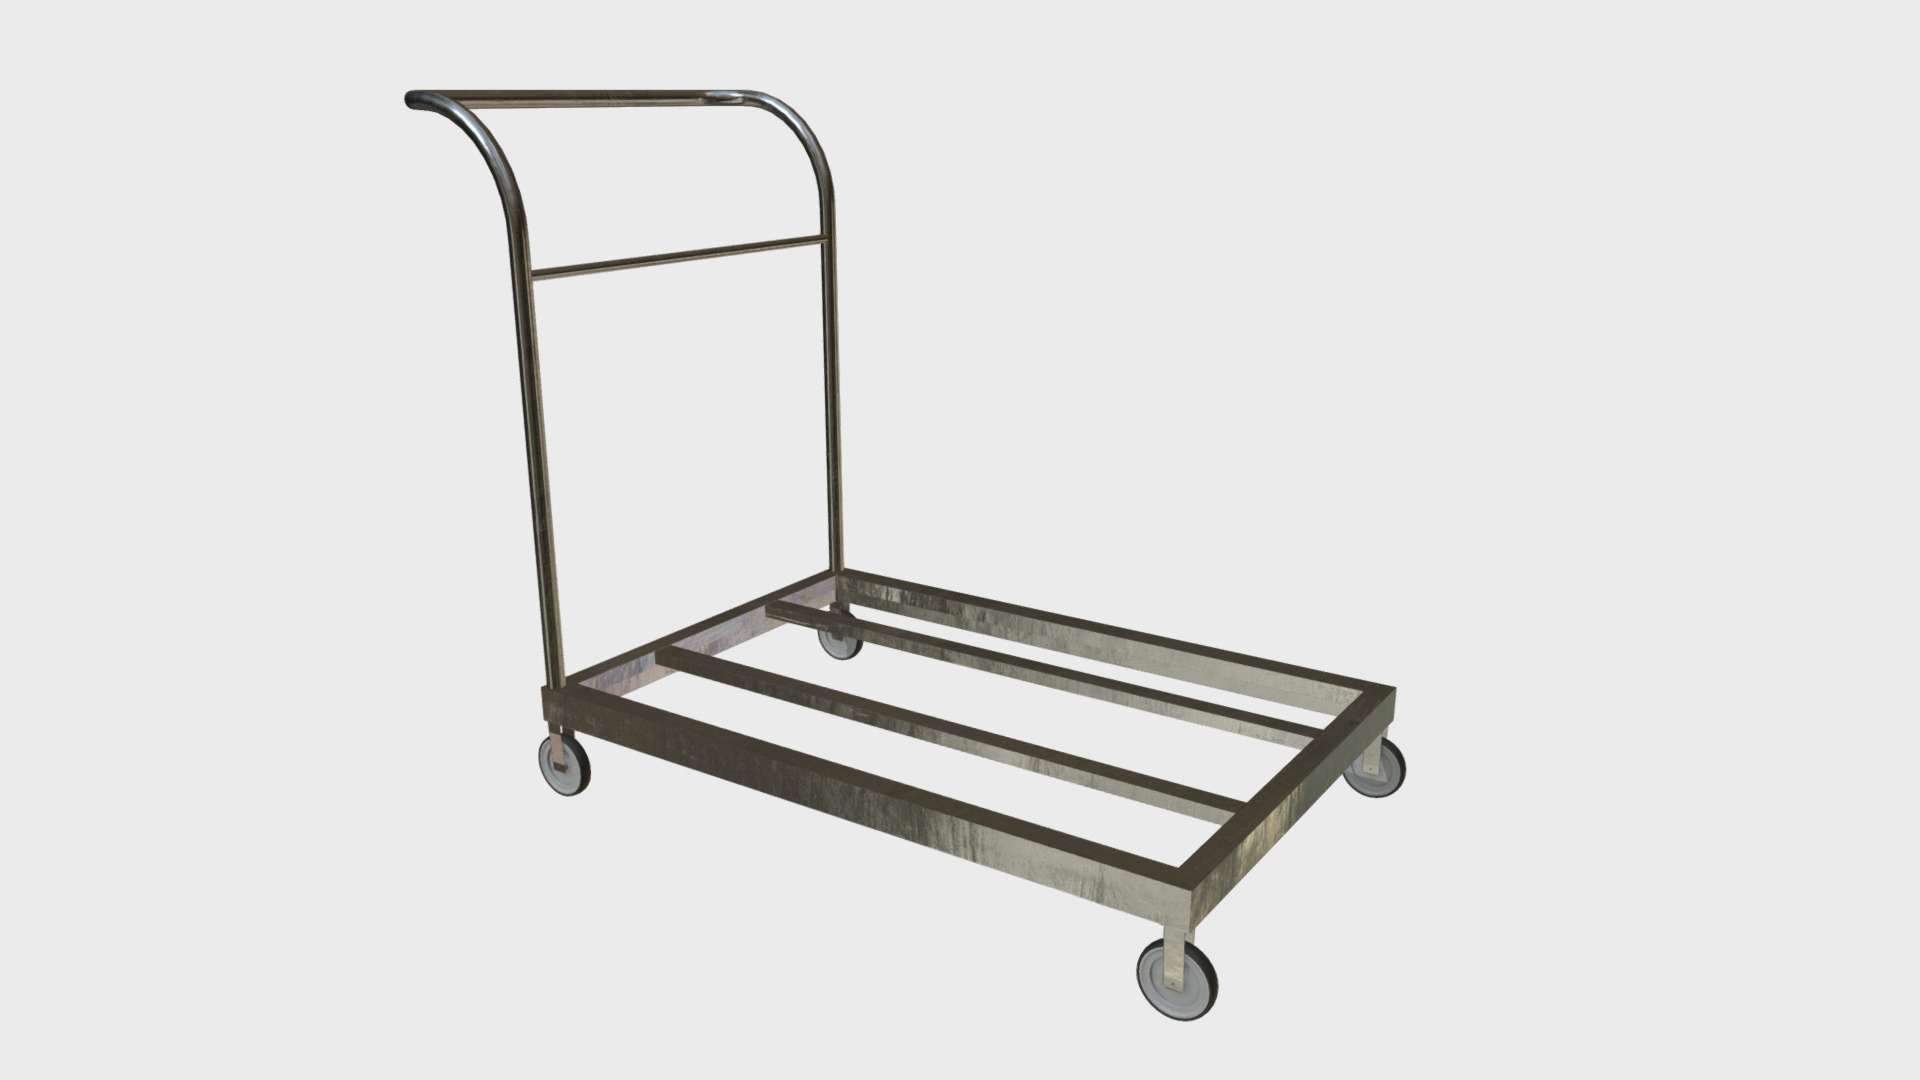 3D model Platform trolley cart 2 - This is a 3D model of the Platform trolley cart 2. The 3D model is about a metal table with a metal frame.